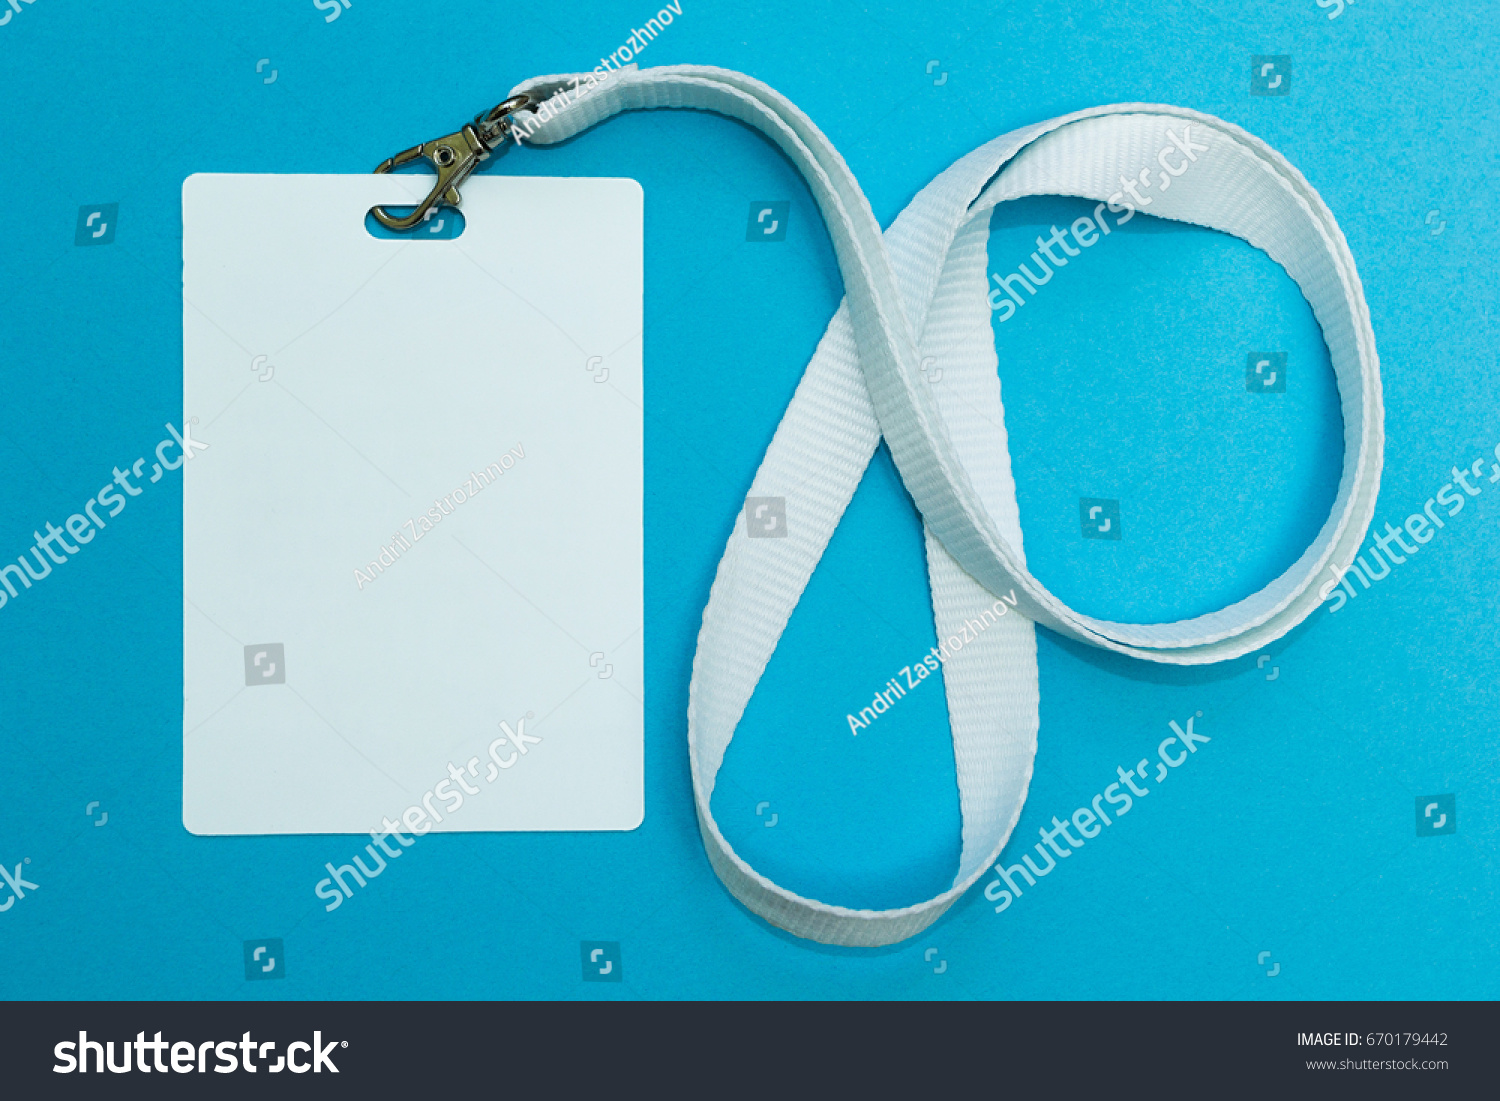 Blank badge mockup isolated on blue. Plain empty name tag with string. #670179442